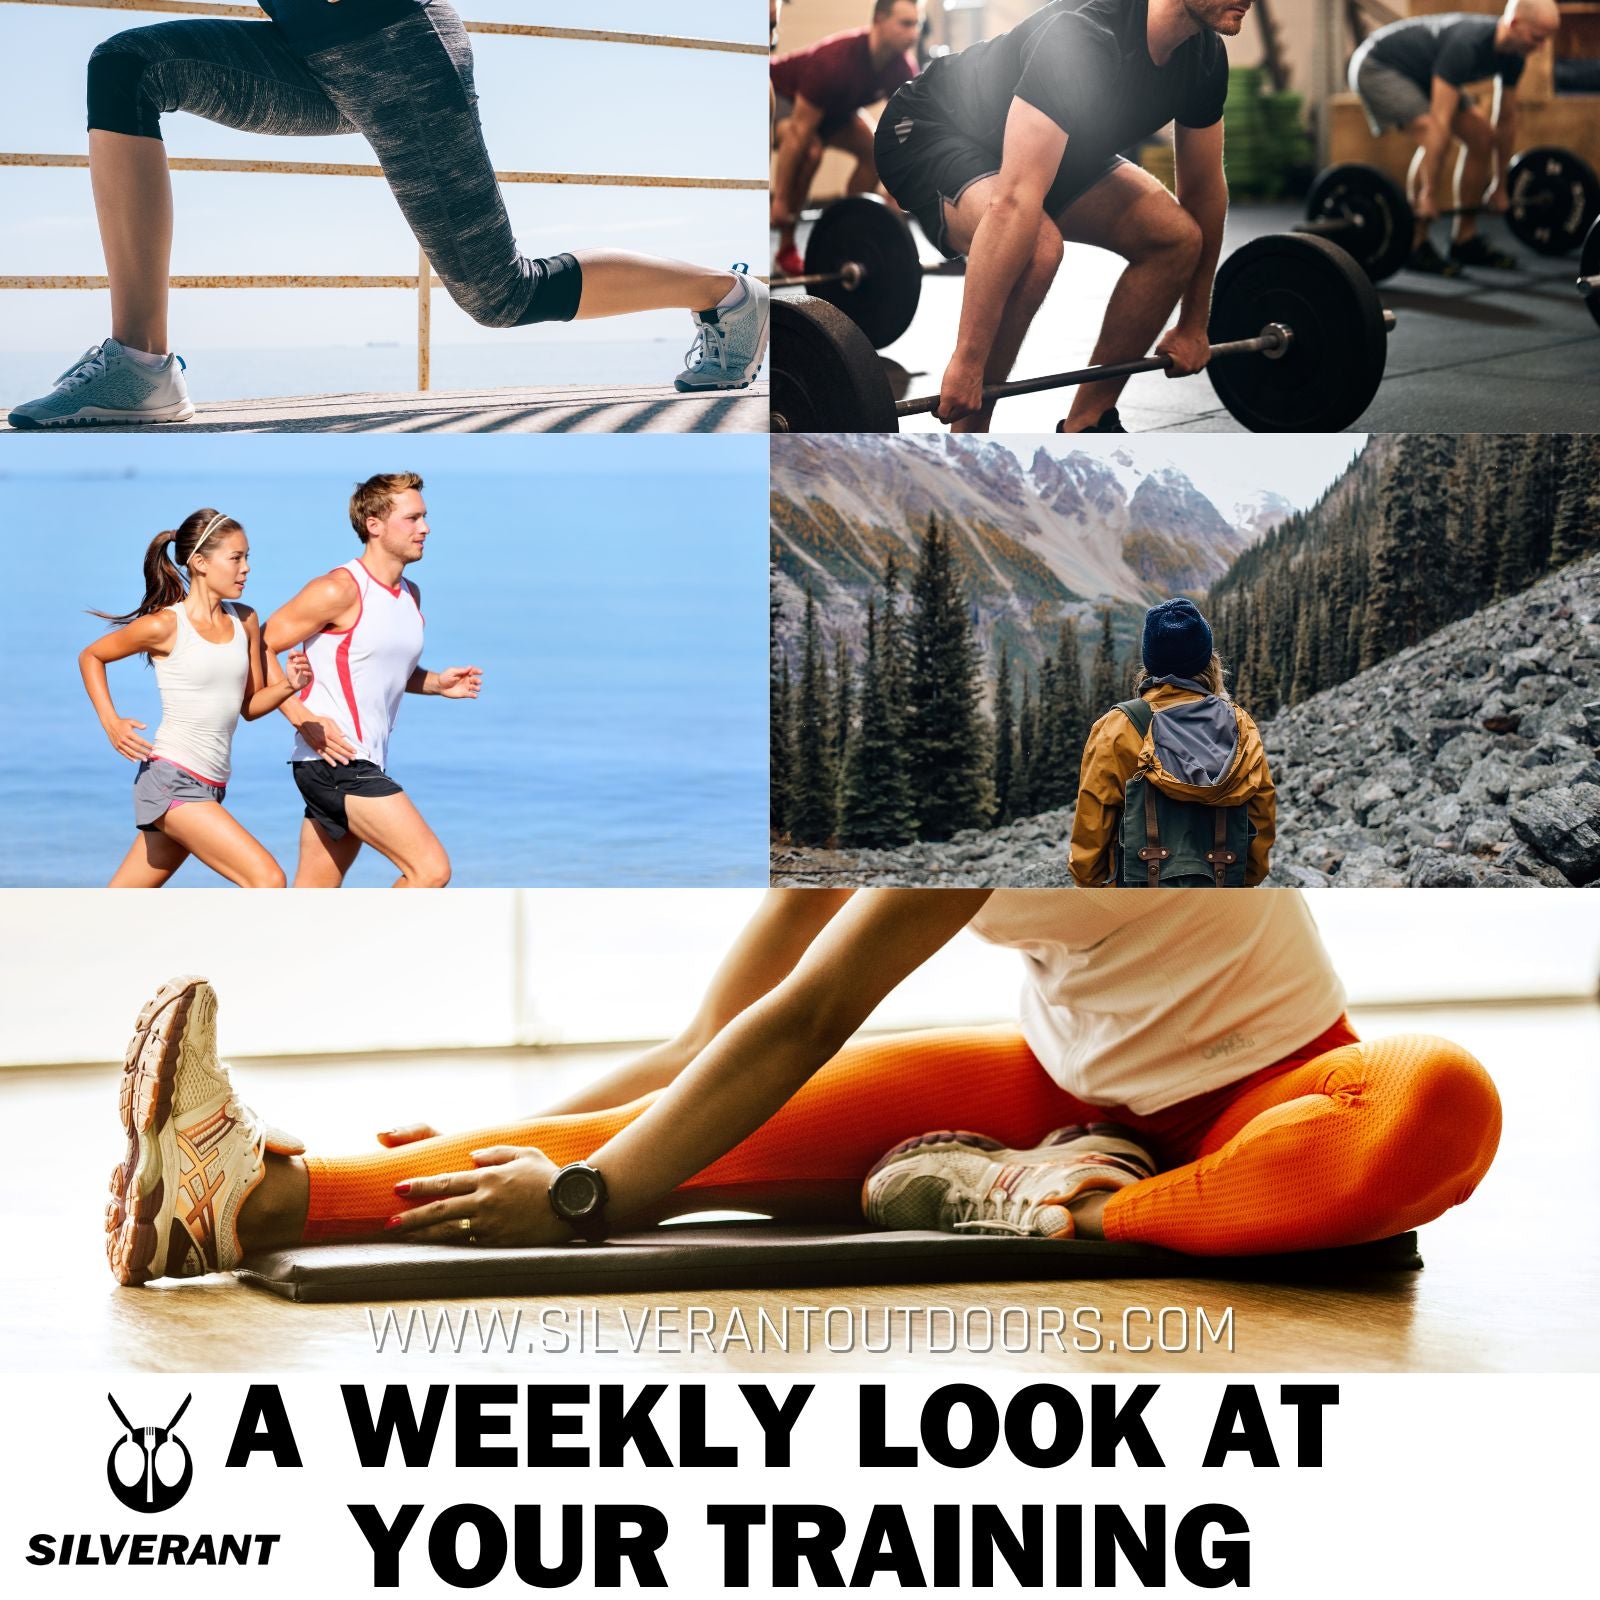 A Weekly Look at Your Training